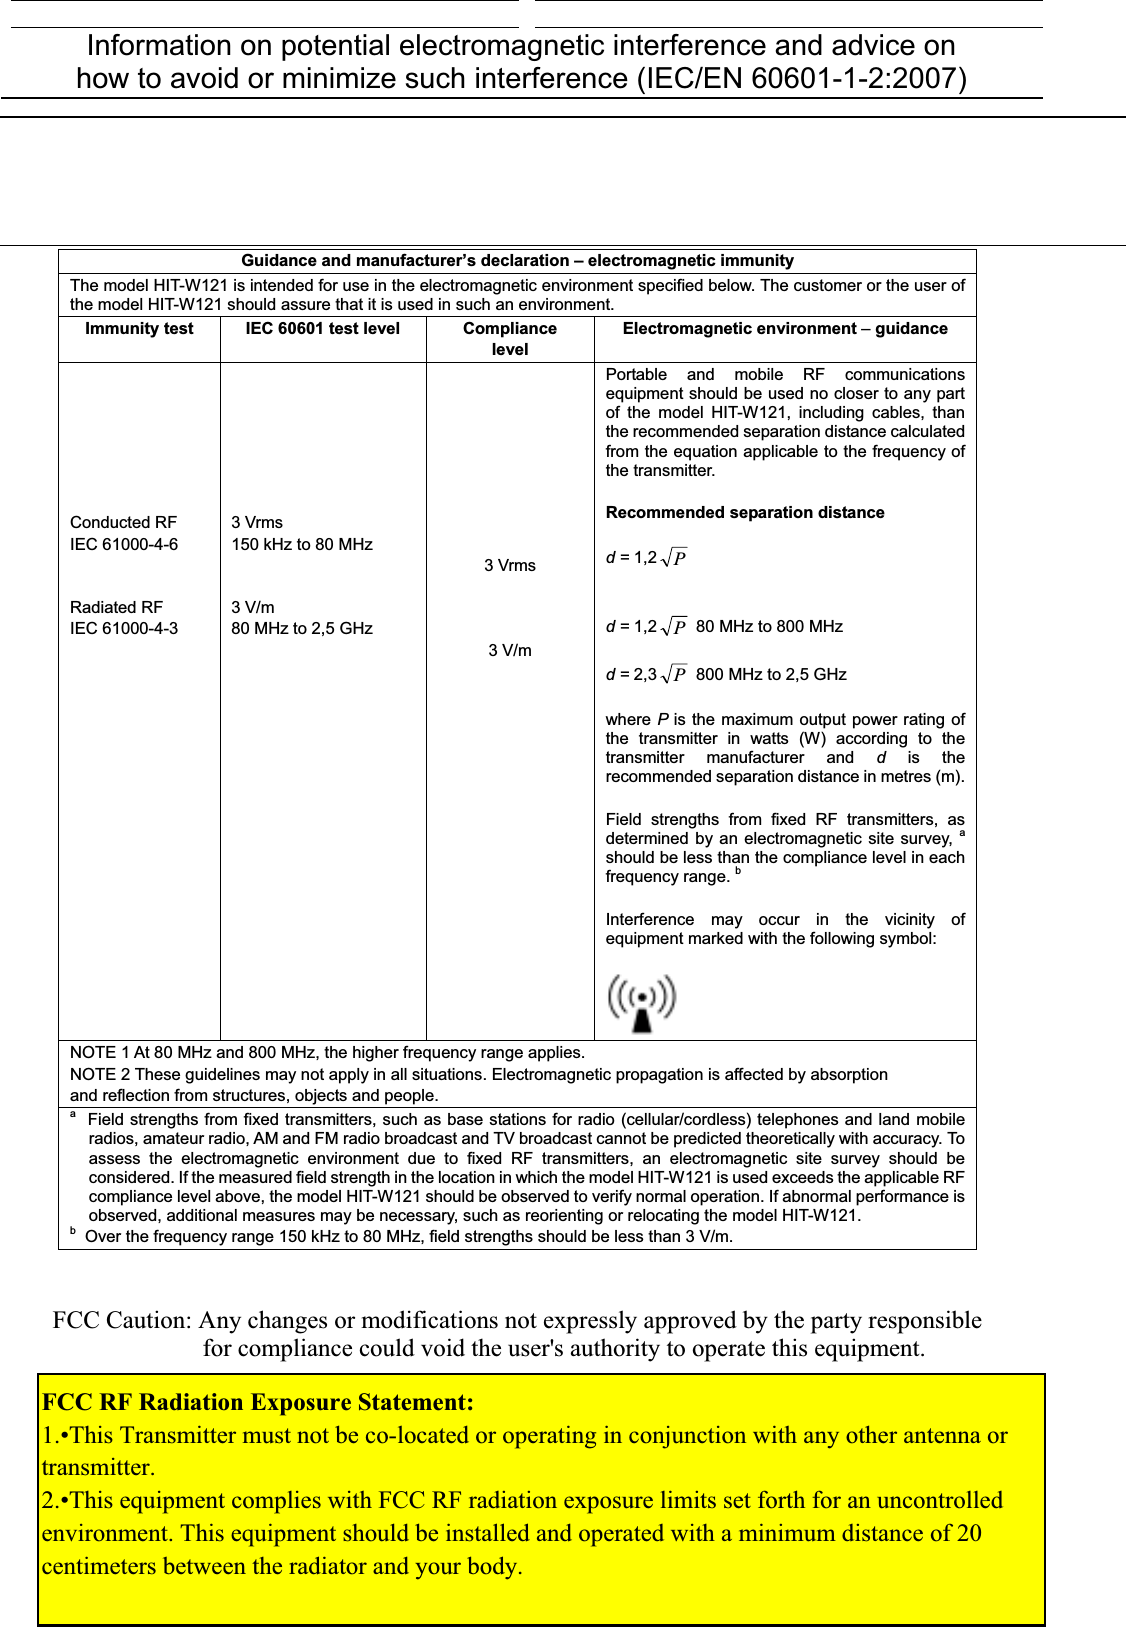 Information on potential electromagnetic interference and advice on how to avoid or minimize such interference (IEC/EN 60601-1-2:2007) Guidance and manufacturer’s declaration – electromagnetic immunity The model HIT-W121 is intended for use in the electromagnetic environment specified below. The customer or the user of the model HIT-W121 should assure that it is used in such an environment. Immunity test  IEC 60601 test level Compliance levelElectromagnetic environment –guidanceConducted RF IEC 61000-4-6 Radiated RF IEC 61000-4-3 3 Vrms 150 kHz to 80 MHz 3 V/m 80 MHz to 2,5 GHz 3 Vrms 3 V/m Portable and mobile RF communications equipment should be used no closer to any part of the model HIT-W121, including cables, than the recommended separation distance calculated from the equation applicable to the frequency of the transmitter. Recommended separation distance                                                                                d = 1,2 P                                                                                 d = 1,2 P 80 MHz to 800 MHz                                                                                 d = 2,3 P 800 MHz to 2,5 GHz where Pis the maximum output power rating of the transmitter in watts (W) according to the transmitter manufacturer and dis the recommended separation distance in metres (m). Field strengths from fixed RF transmitters, as determined by an electromagnetic site survey, ashould be less than the compliance level in each frequency range. bInterference may occur in the vicinity of equipment marked with the following symbol: NOTE 1 At 80 MHz and 800 MHz, the higher frequency range applies. NOTE 2 These guidelines may not apply in all situations. Electromagnetic propagation is affected by absorption and reflection from structures, objects and people. a  Field strengths from fixed transmitters, such as base stations for radio (cellular/cordless) telephones and land mobile radios, amateur radio, AM and FM radio broadcast and TV broadcast cannot be predicted theoretically with accuracy. To assess the electromagnetic environment due to fixed RF transmitters, an electromagnetic site survey should be considered. If the measured field strength in the location in which the model HIT-W121 is used exceeds the applicable RF compliance level above, the model HIT-W121 should be observed to verify normal operation. If abnormal performance is observed, additional measures may be necessary, such as reorienting or relocating the model HIT-W121. b  Over the frequency range 150 kHz to 80 MHz, field strengths should be less than 3 V/m. FCC Caution: Any changes or modifications not expressly approved by the party responsiblefor compliance could void the user&apos;s authority to operate this equipment.FCC RF Radiation Exposure Statement: 1.•This Transmitter must not be co-located or operating in conjunction with any other antenna or transmitter.2.•This equipment complies with FCC RF radiation exposure limits set forth for an uncontrolled environment. This equipment should be installed and operated with a minimum distance of 20 centimeters between the radiator and your body.